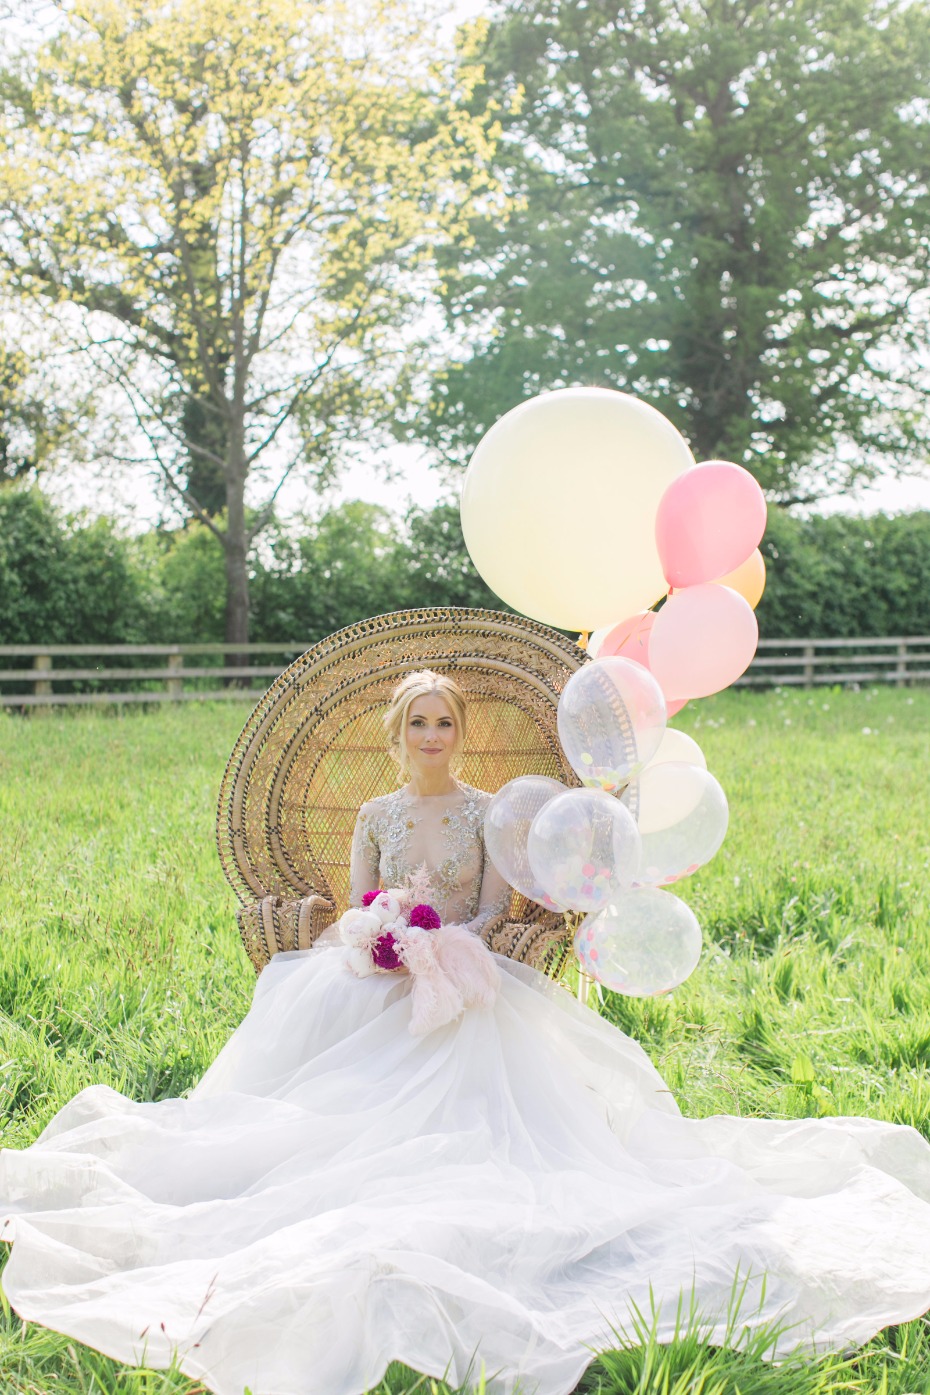 Circus inspired wedding ideas for grown ups